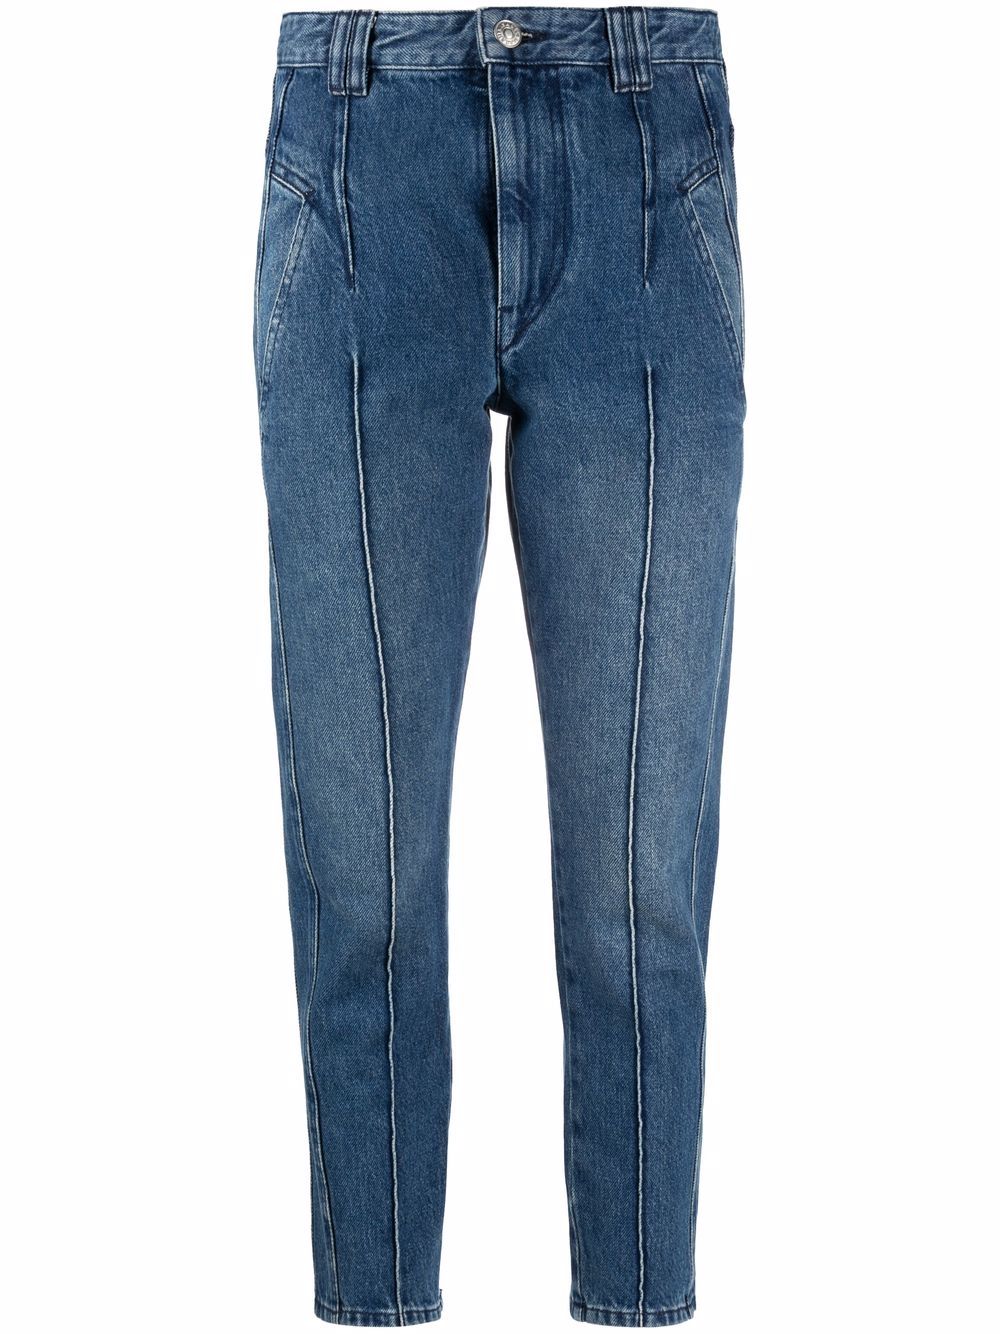 Isabel Marant Étoile Tilly Slim Cropped Jeans In Blue | ModeSens